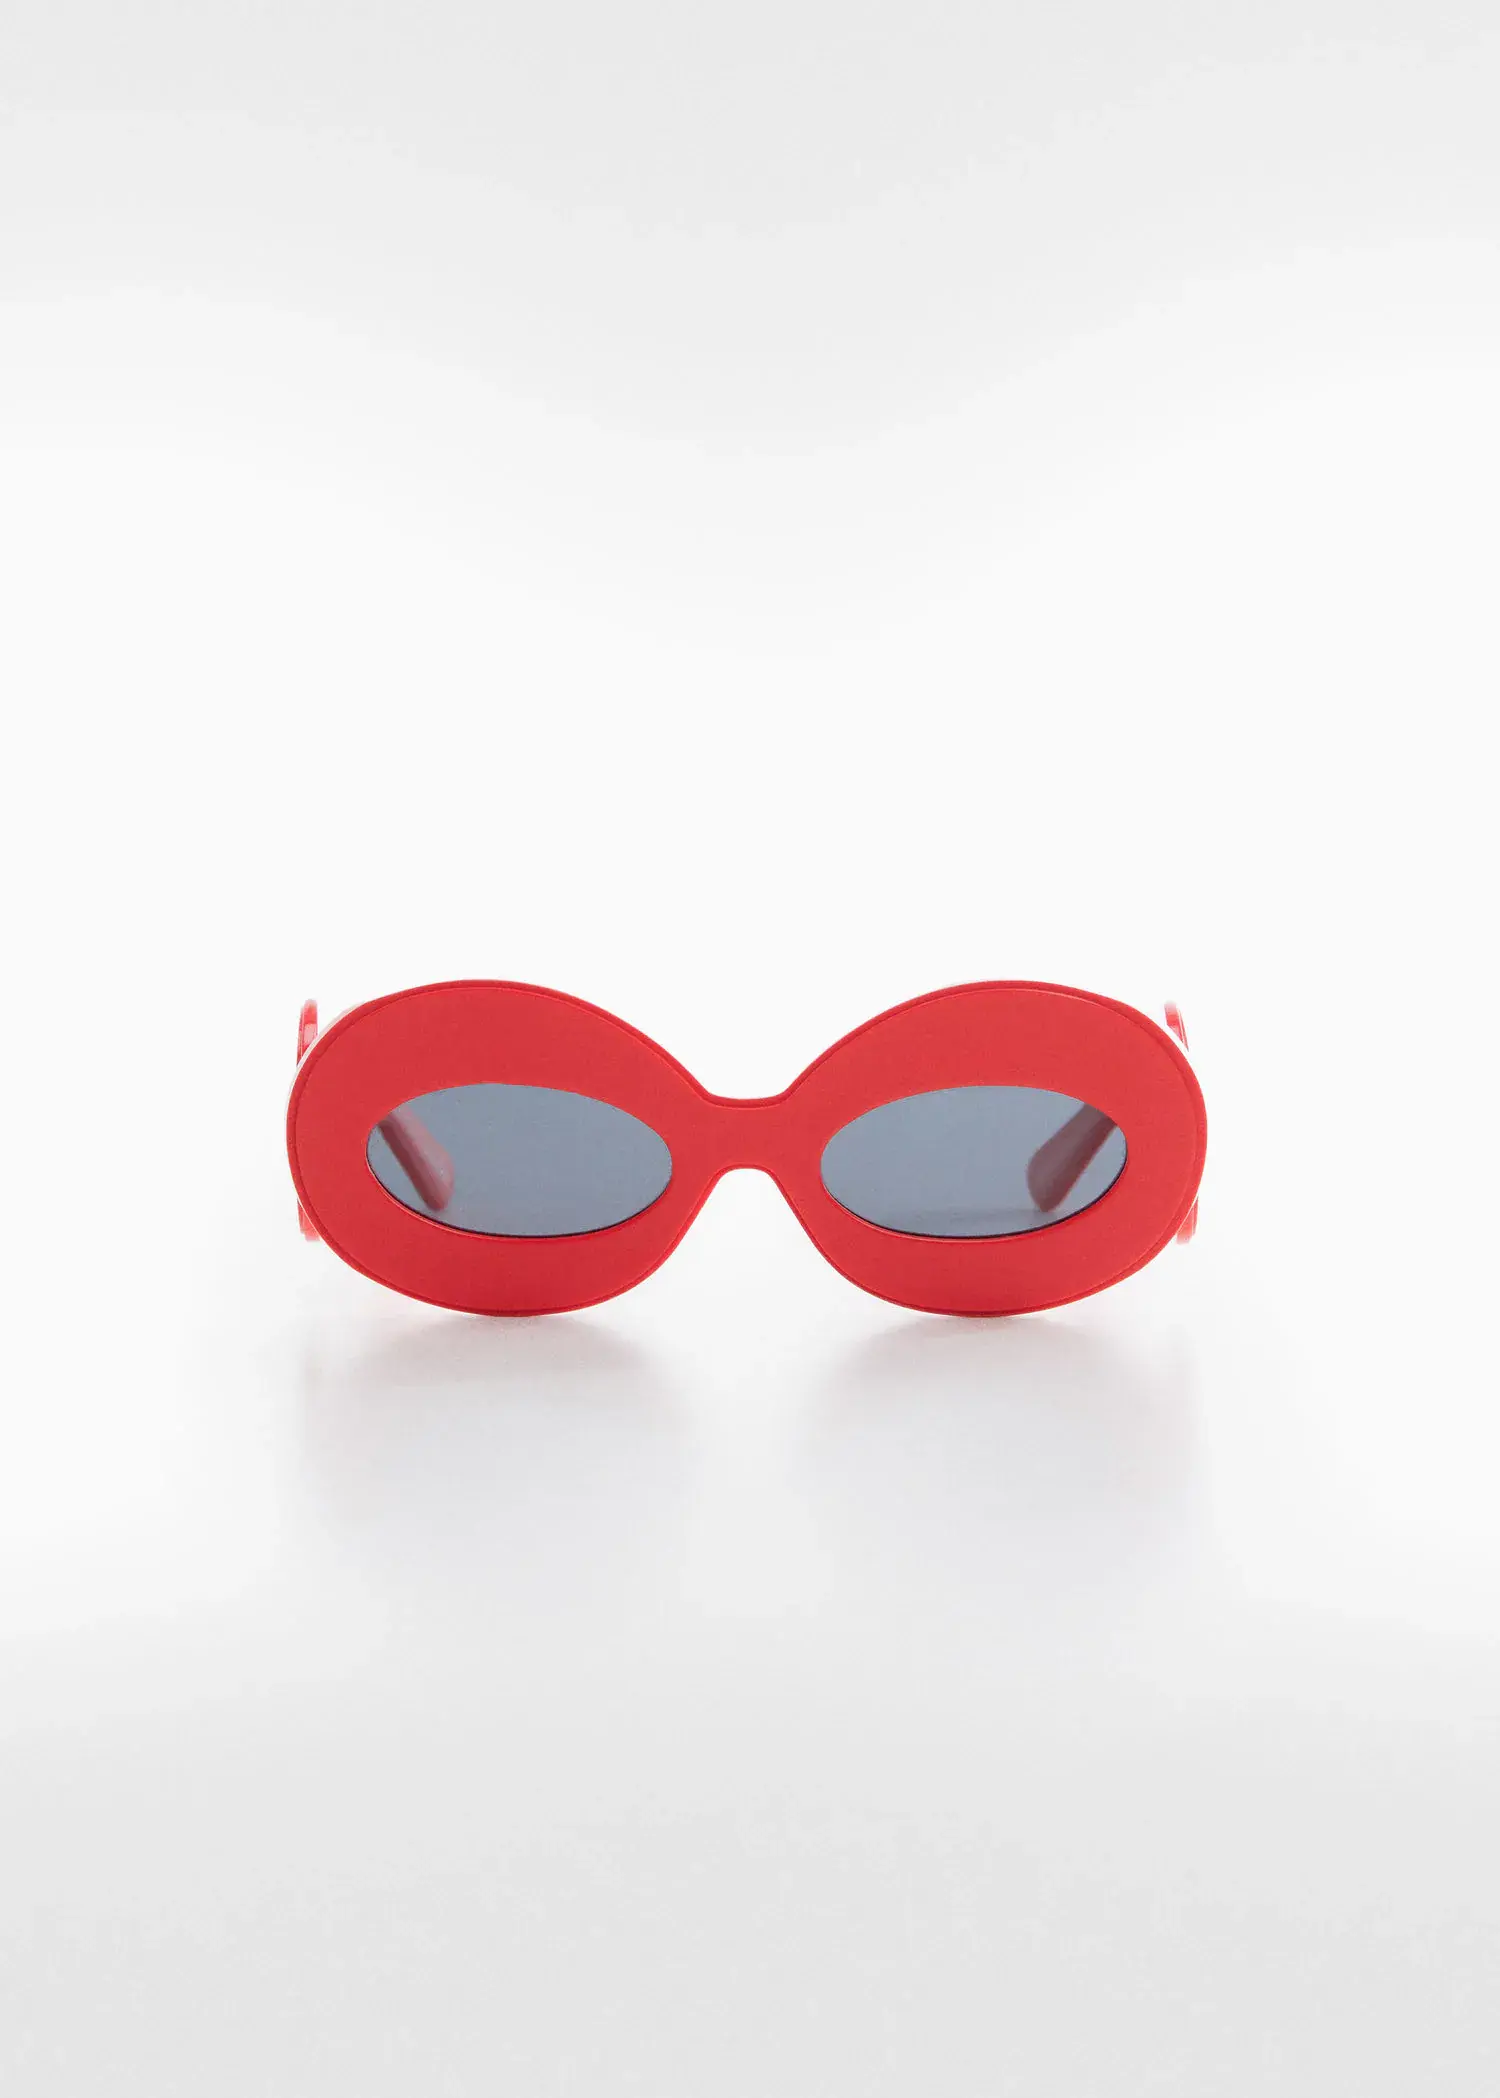 Mango Maxi-frame sunglasses. a pair of red sunglasses sitting on top of a table. 